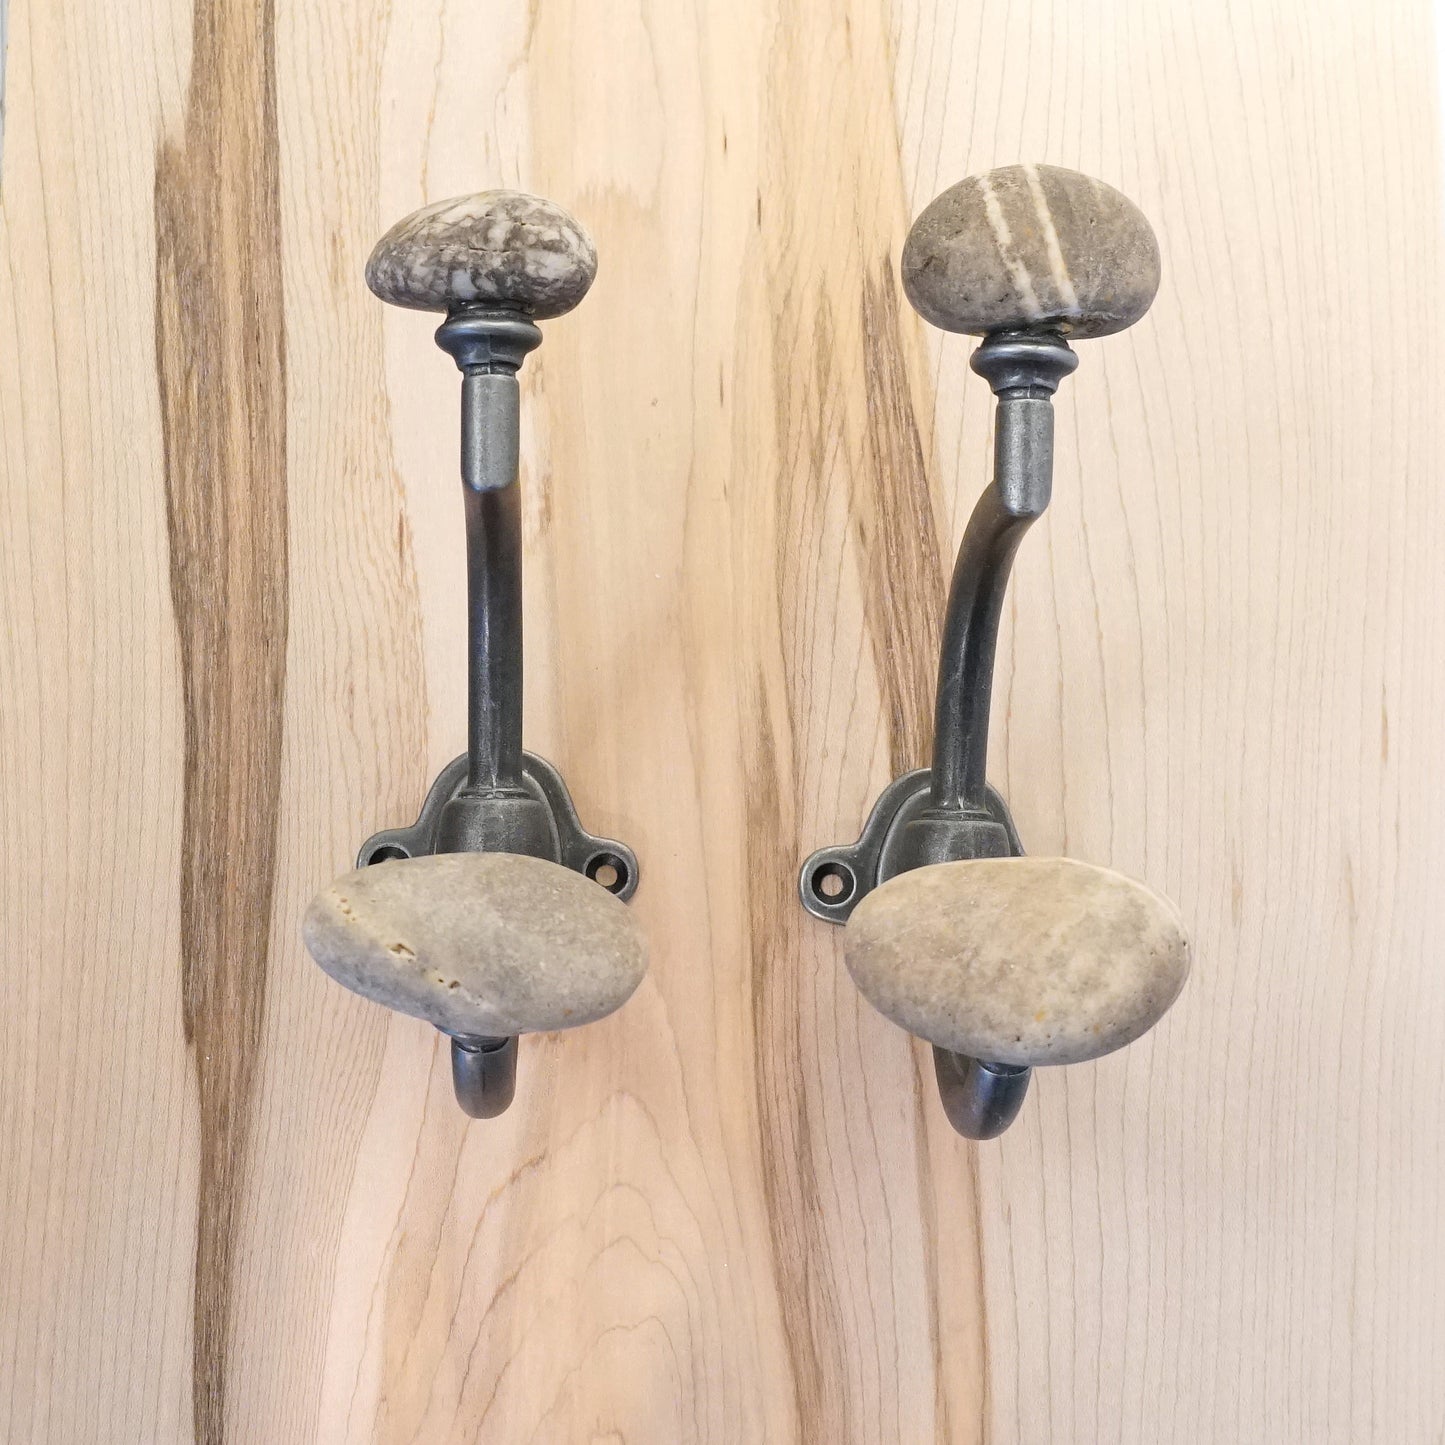 Wall Mount Robe Towel Hook Pair with Striped Wishing Rocks